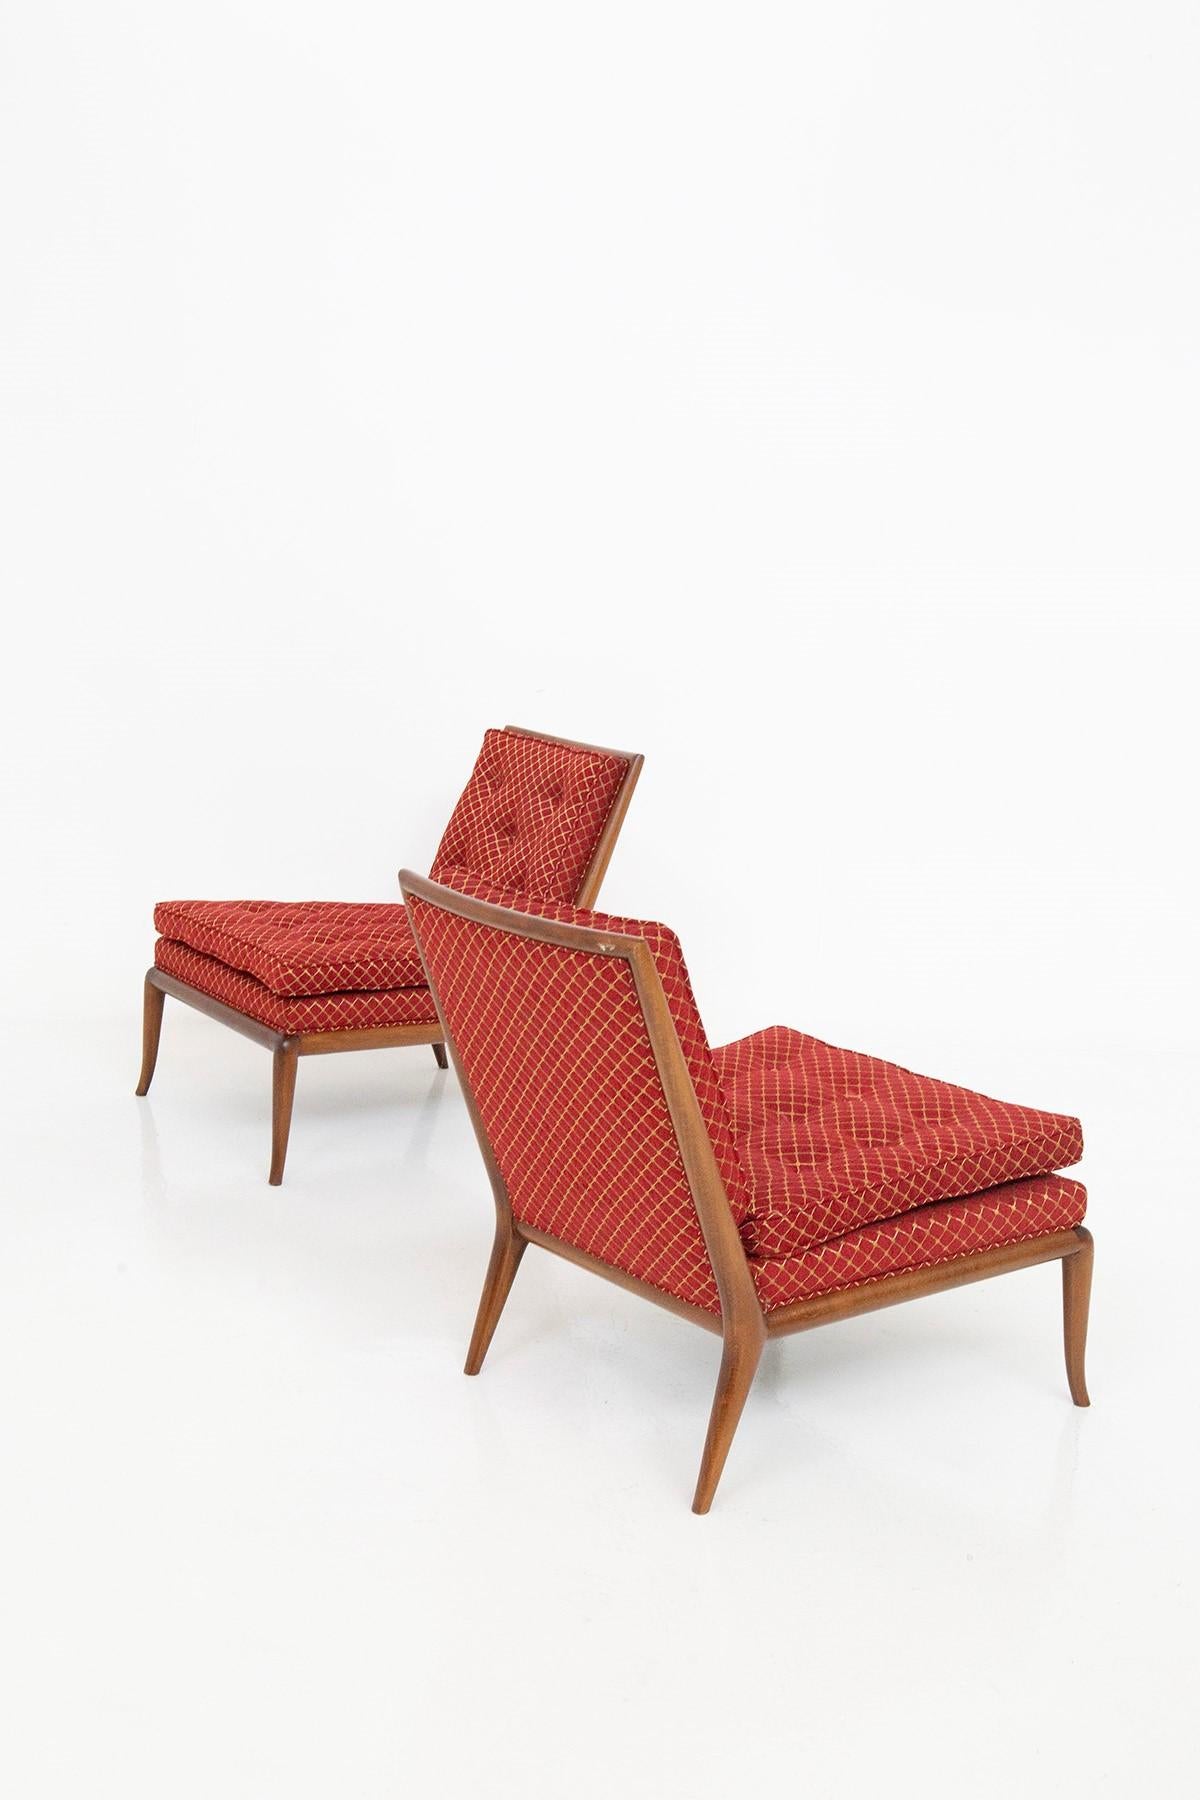 T.H. Robsjohn-Gibbings Slipper Lounge Chairs a Pair for Widdicomb USA 1955 In Good Condition For Sale In Paris, FR